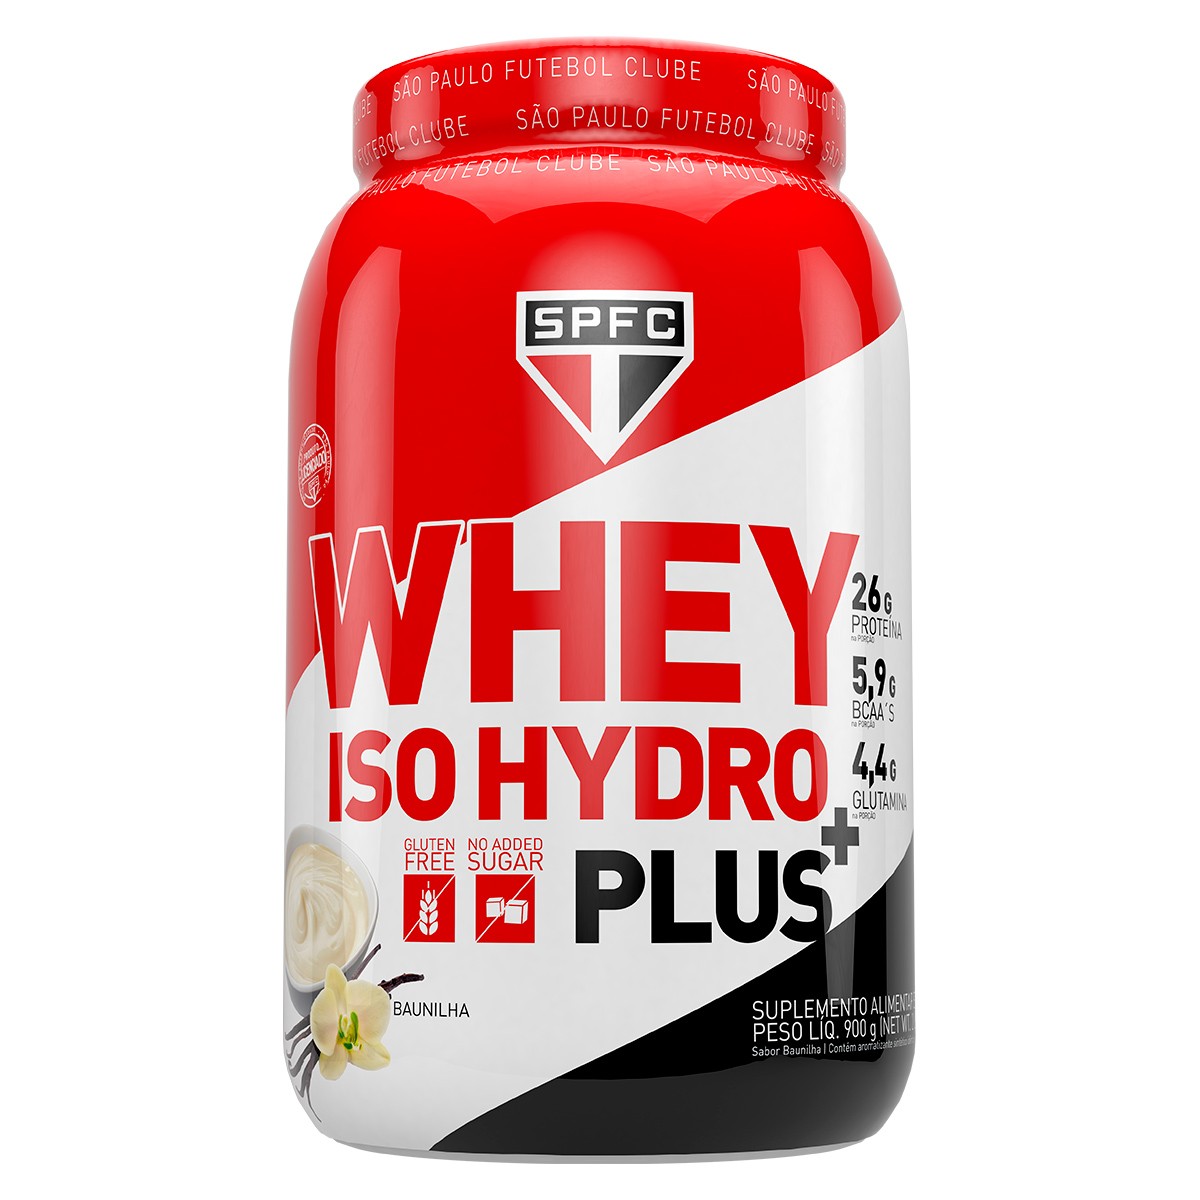 SPFC Whey Iso Hydro Plus 900g - Forster Nutrition